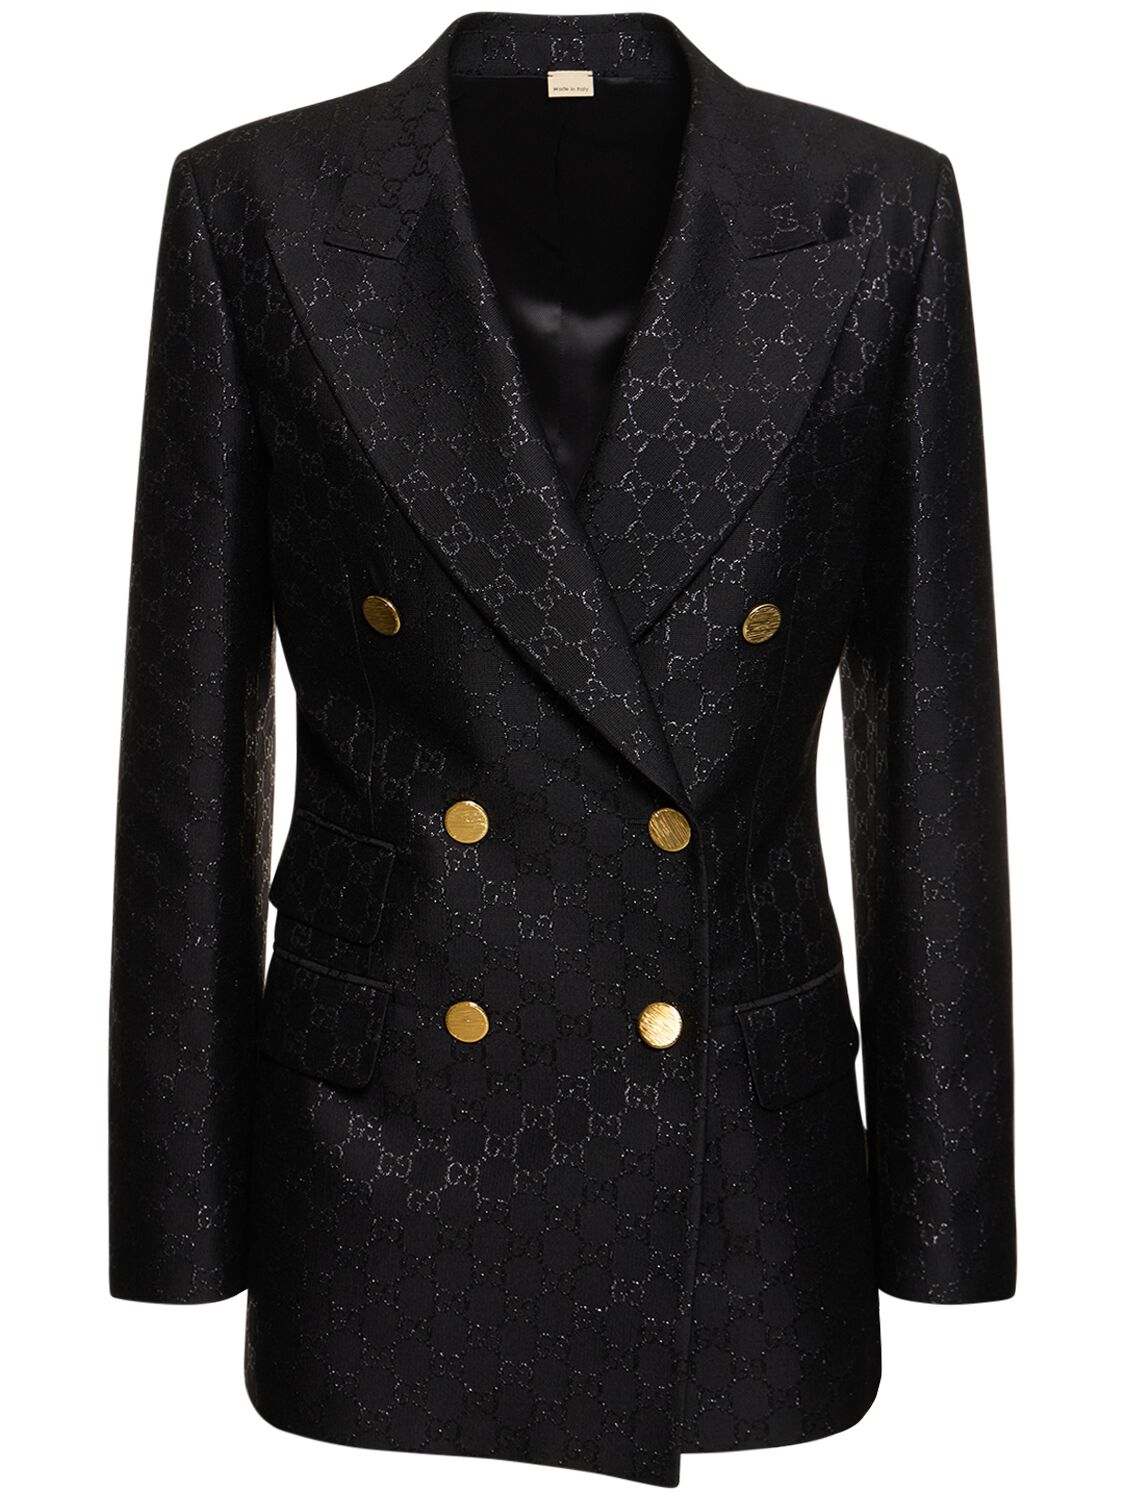 Image of Gg Lamé Wool Blend Jacket